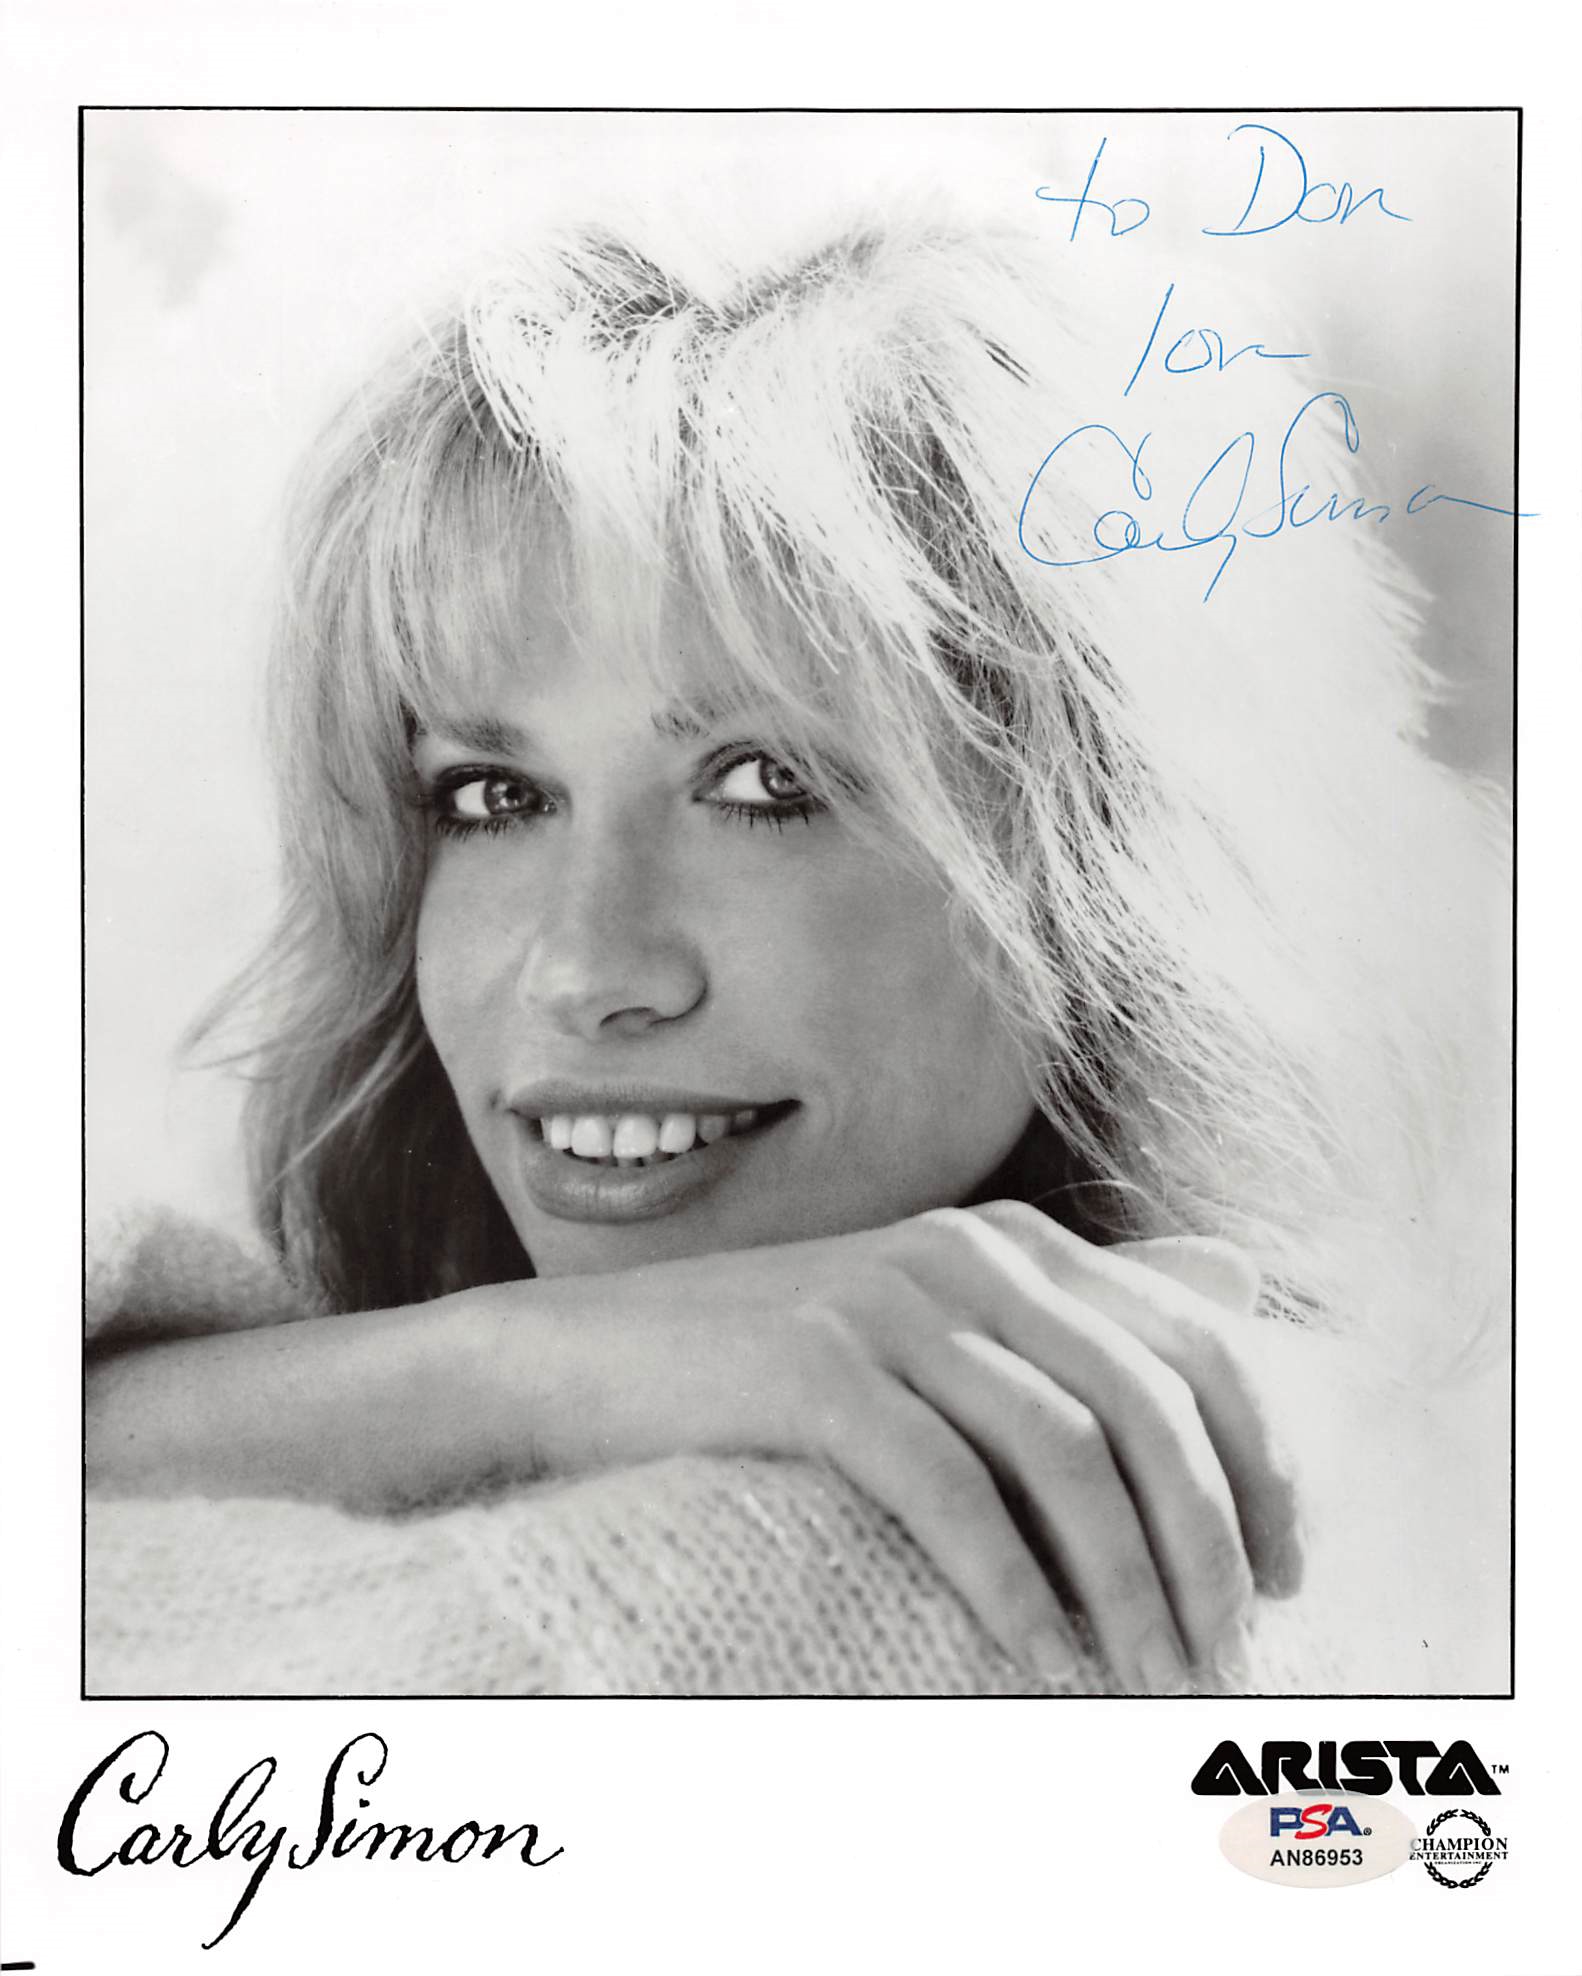 Press Pass Collectibles Carly Simon Musician To Don Love Authentic Signed 8x10 Photo PSA/DNA #AN86953